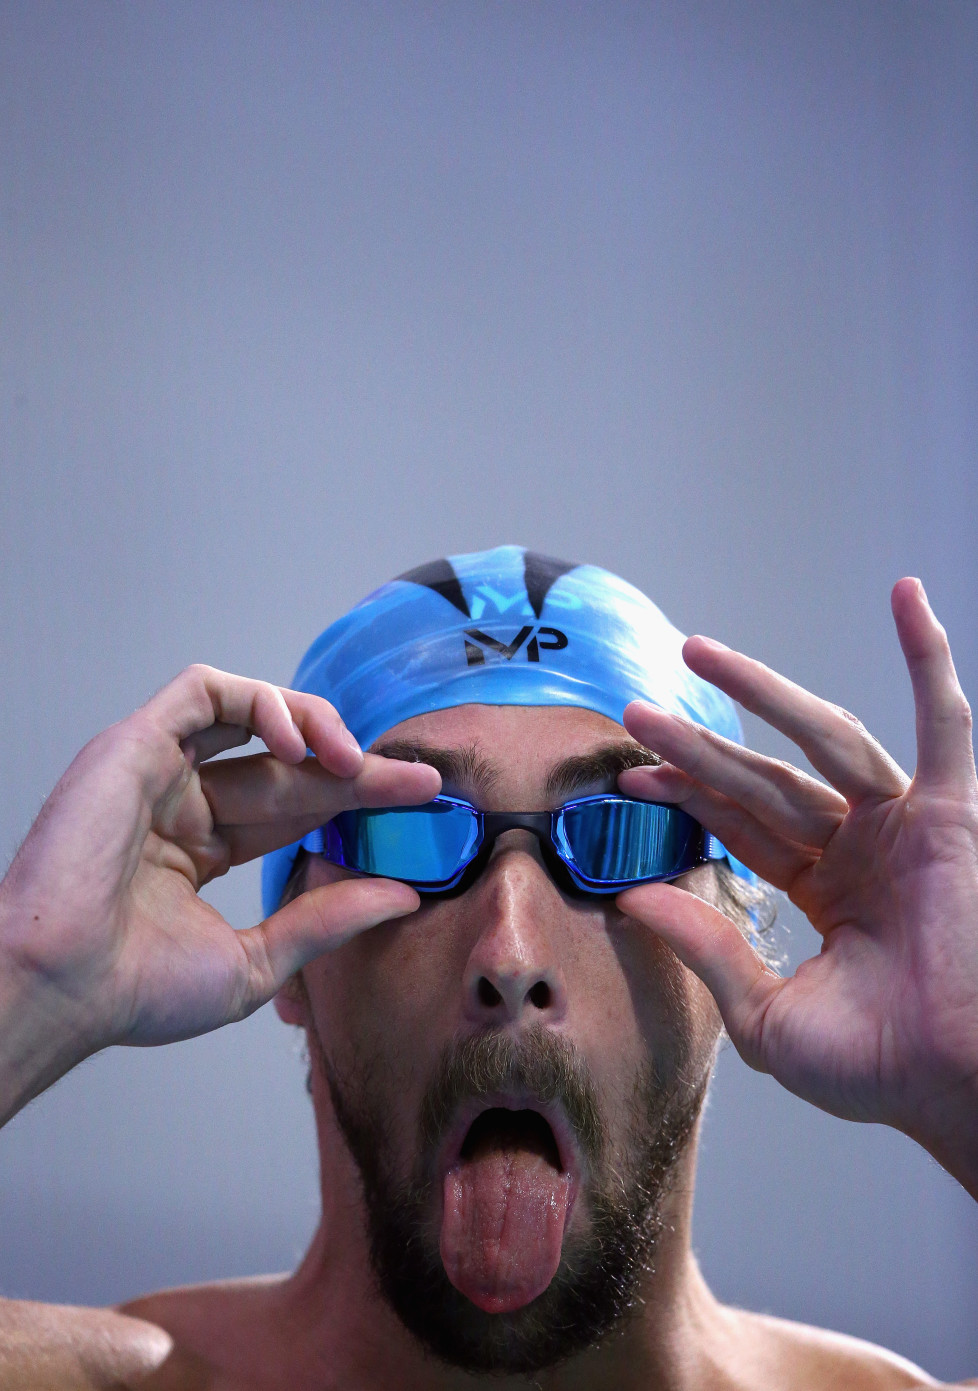 AUSTIN, TX - JANUARY 15: Michael Phelps adjusts his googles before competing in the Men's 100 meter butterfly final during the Arena Pro Swim Series at Austin on January 15, 2016 in Austin, Texas. (Photo by Ronald Martinez/Getty Images)